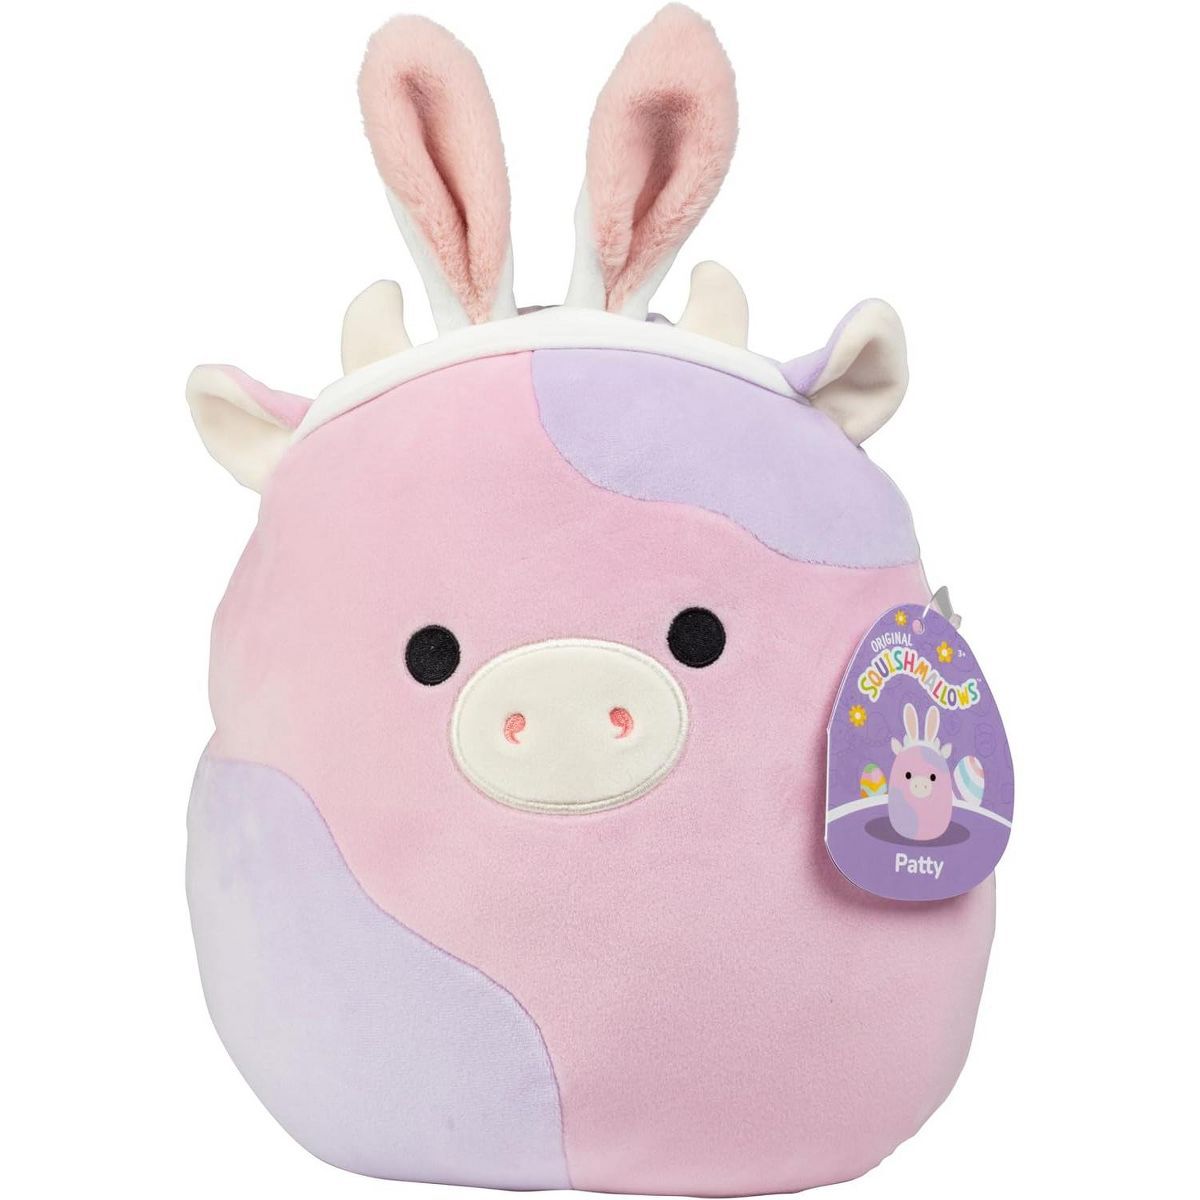 Squishmallows 10" Patty The Cow Easter Plush - Officially Licensed Kellytoy - Collectible Cute So... | Target